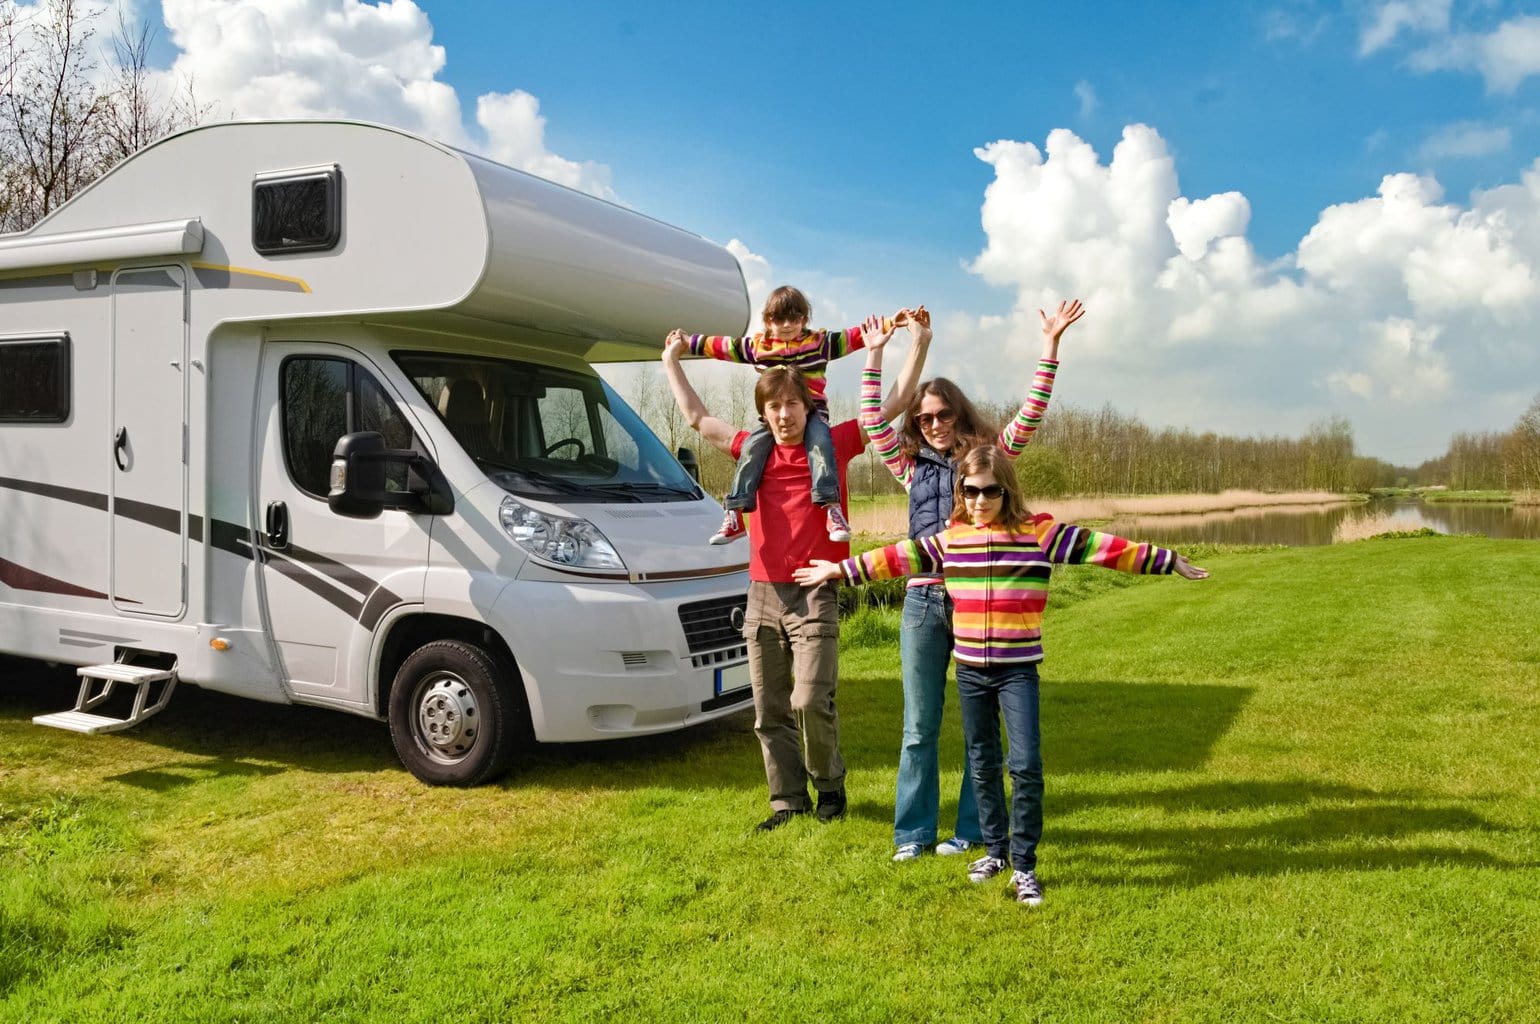 Motorhome Hire For The Family: What To Expect When Renting One